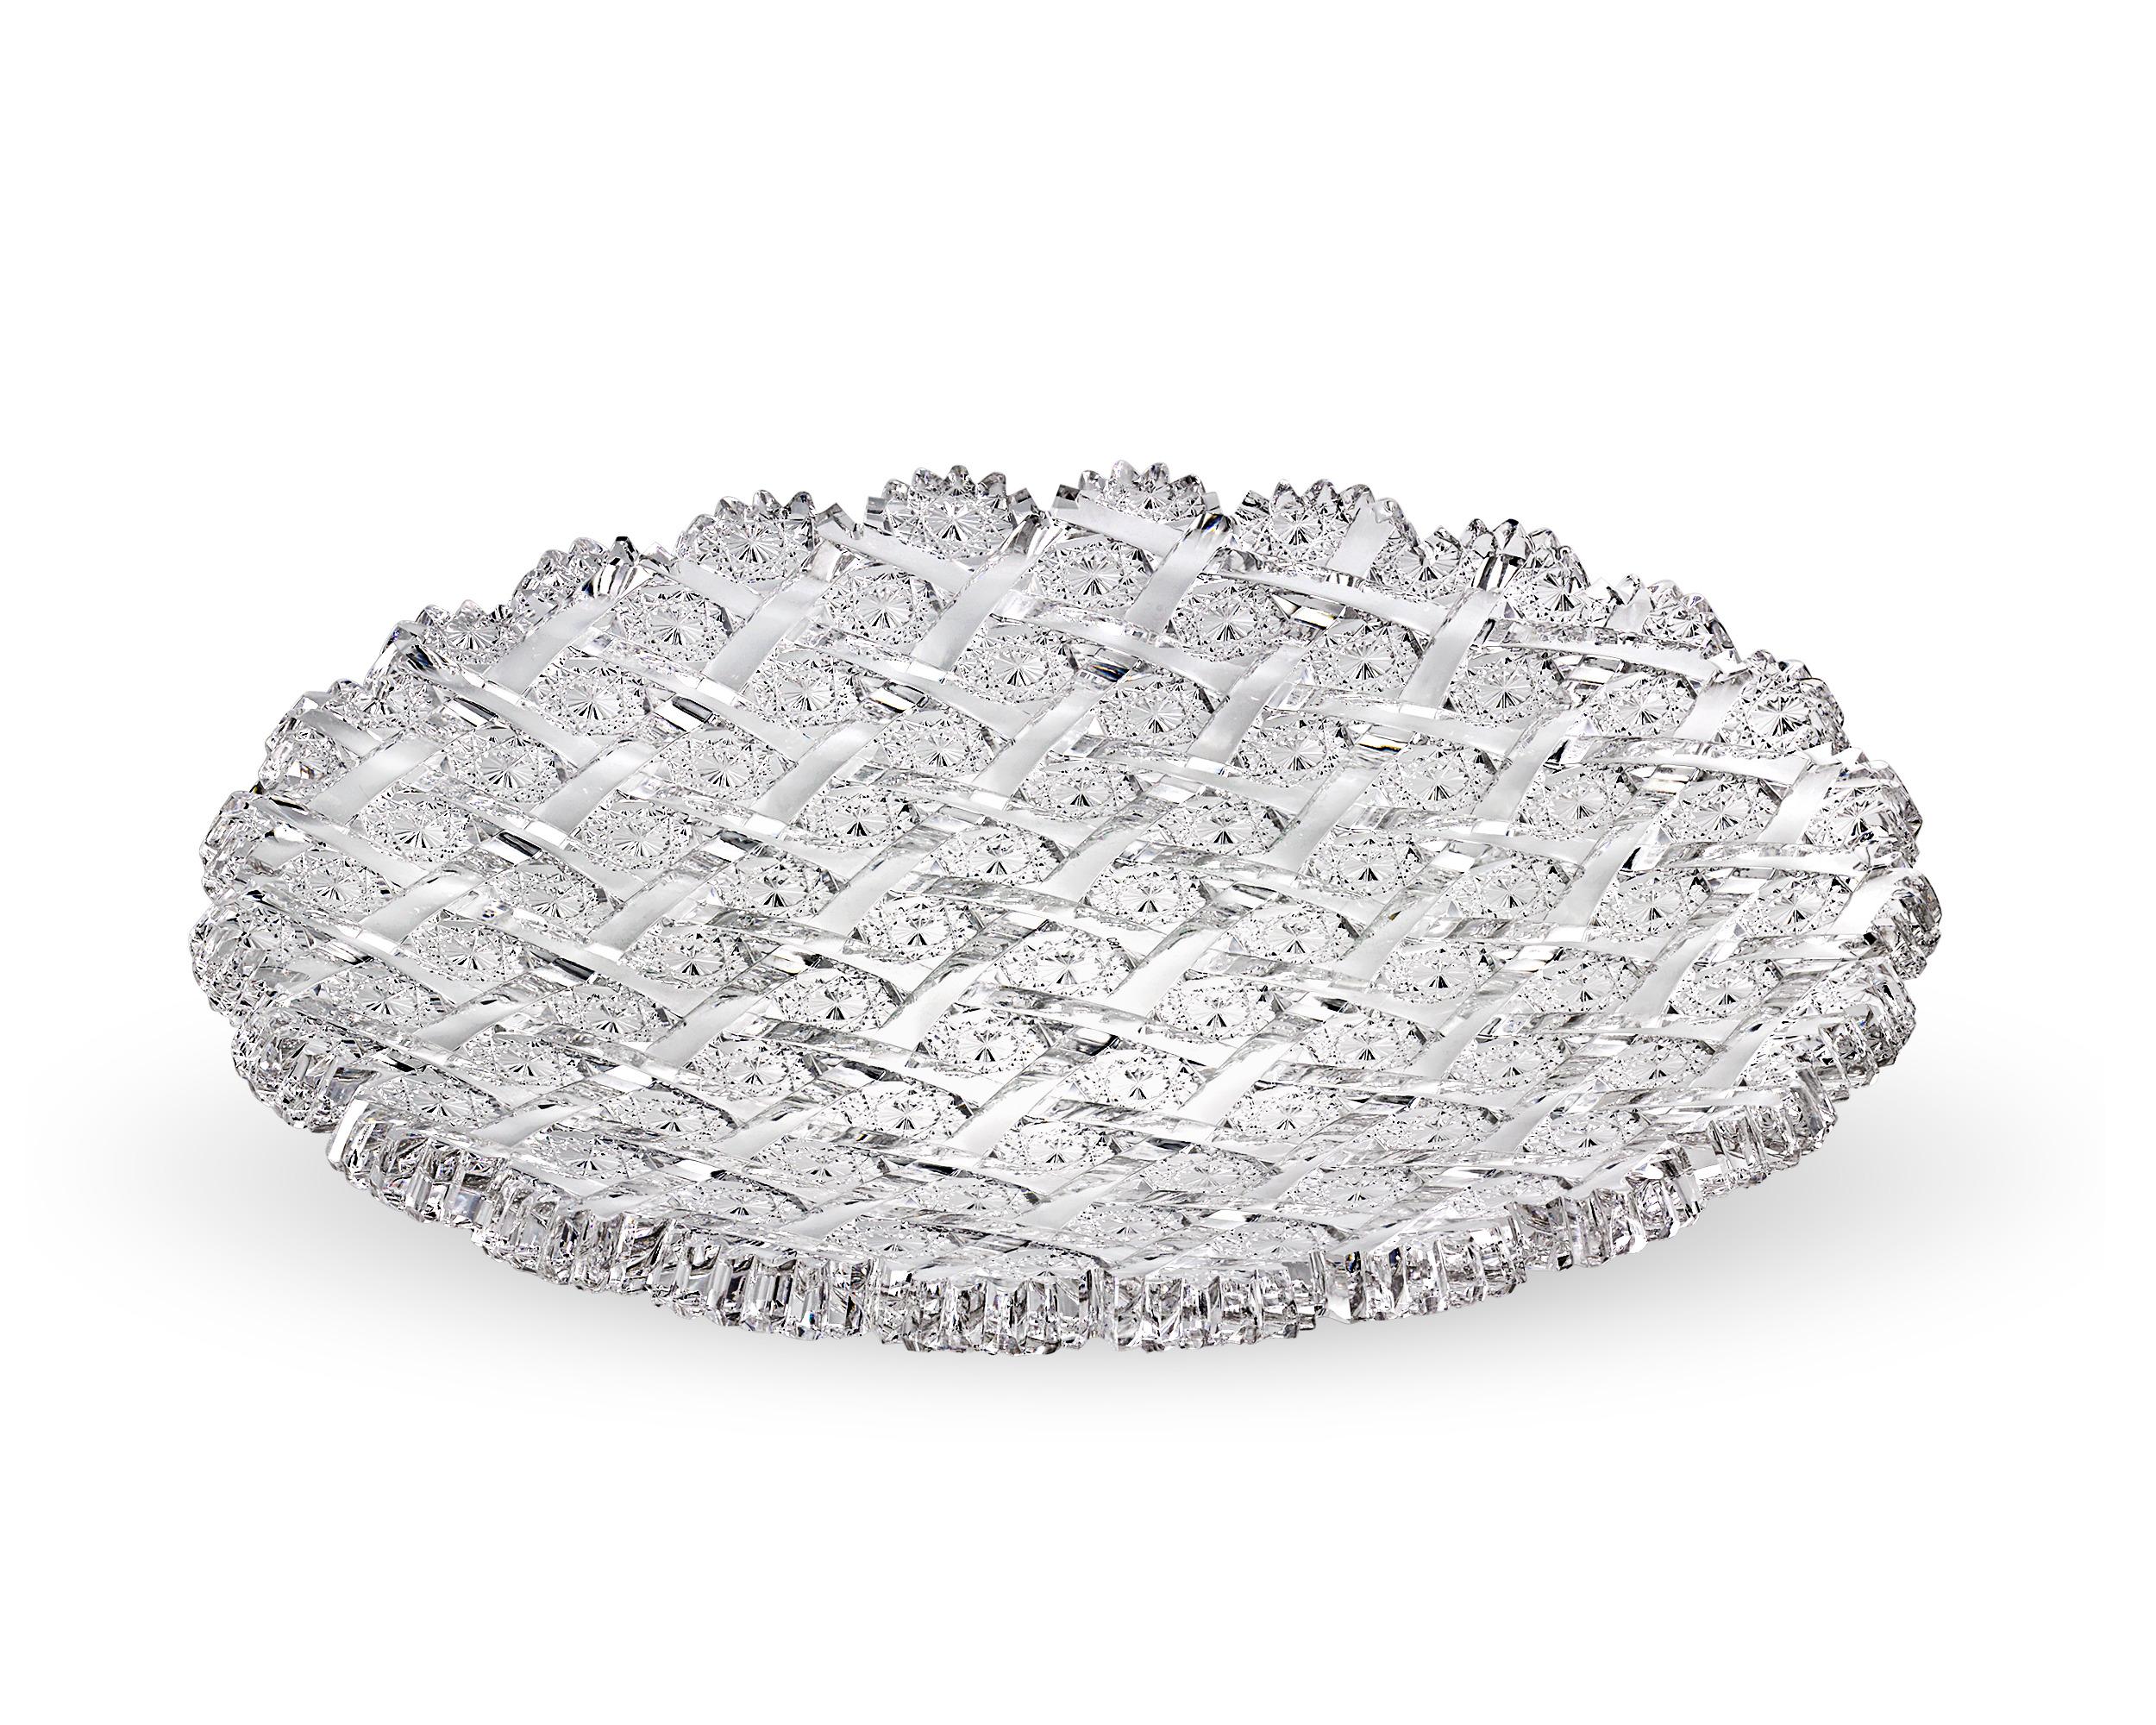 The Lattice and Rosettes pattern adorns this American Brilliant Period cut glass tray by the renowned T.G. Hawkes & Co. With its crisp scalloped rim, the tray provides the ideal canvas upon which this coveted pattern can be appreciated. Ribbons of